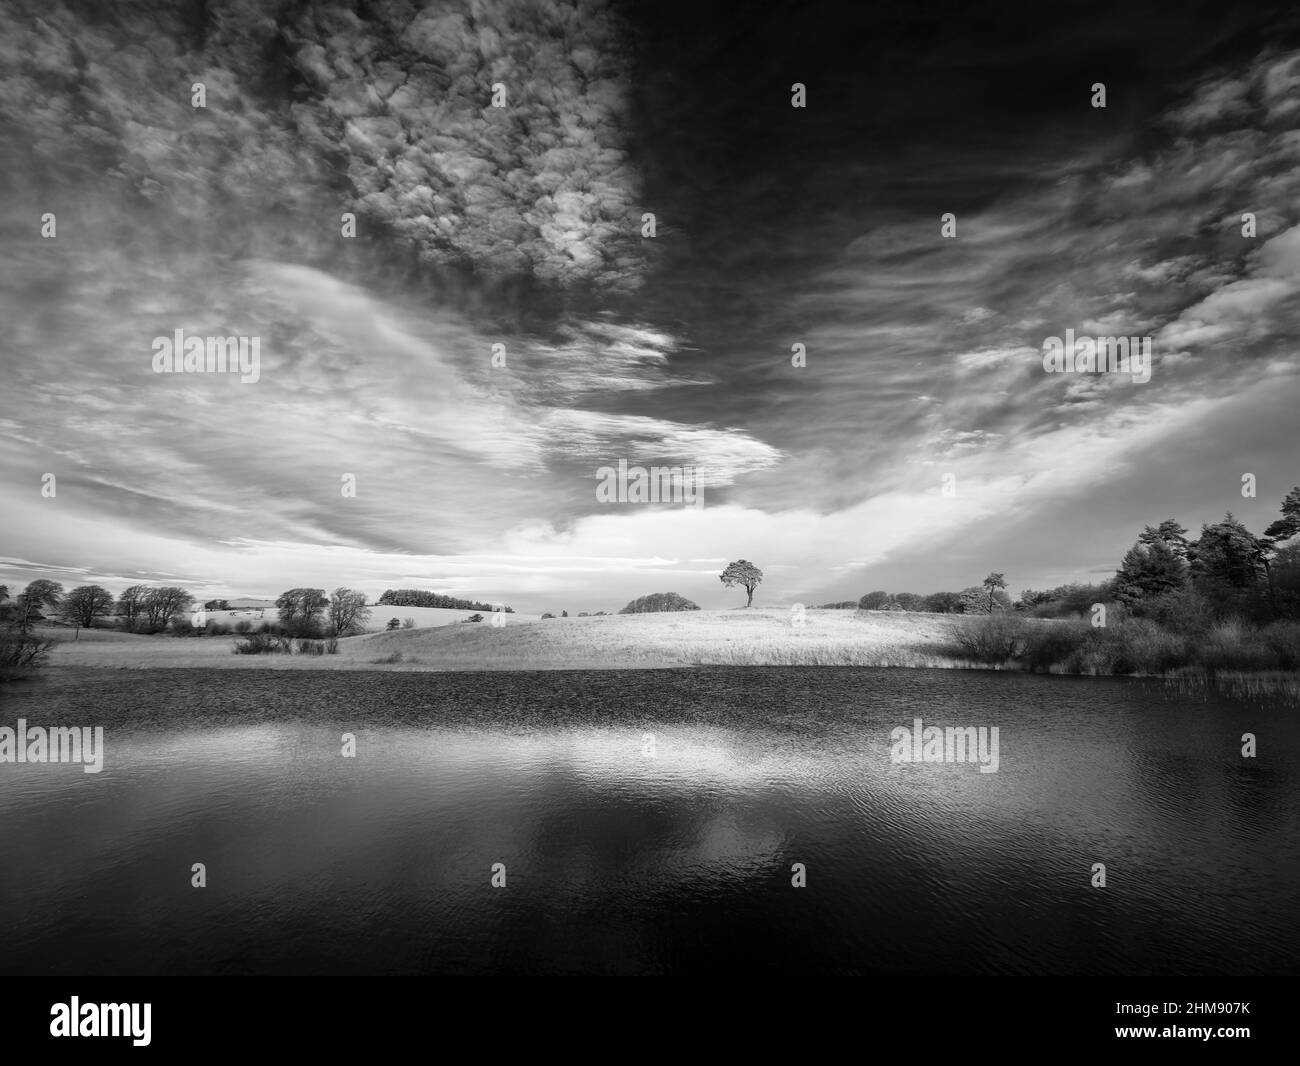 An infrared image of Waldergrave Pool at Priddy Mineries, the old mining landscape in the Mendip Hills National Landscape, Somerset, England. Stock Photo